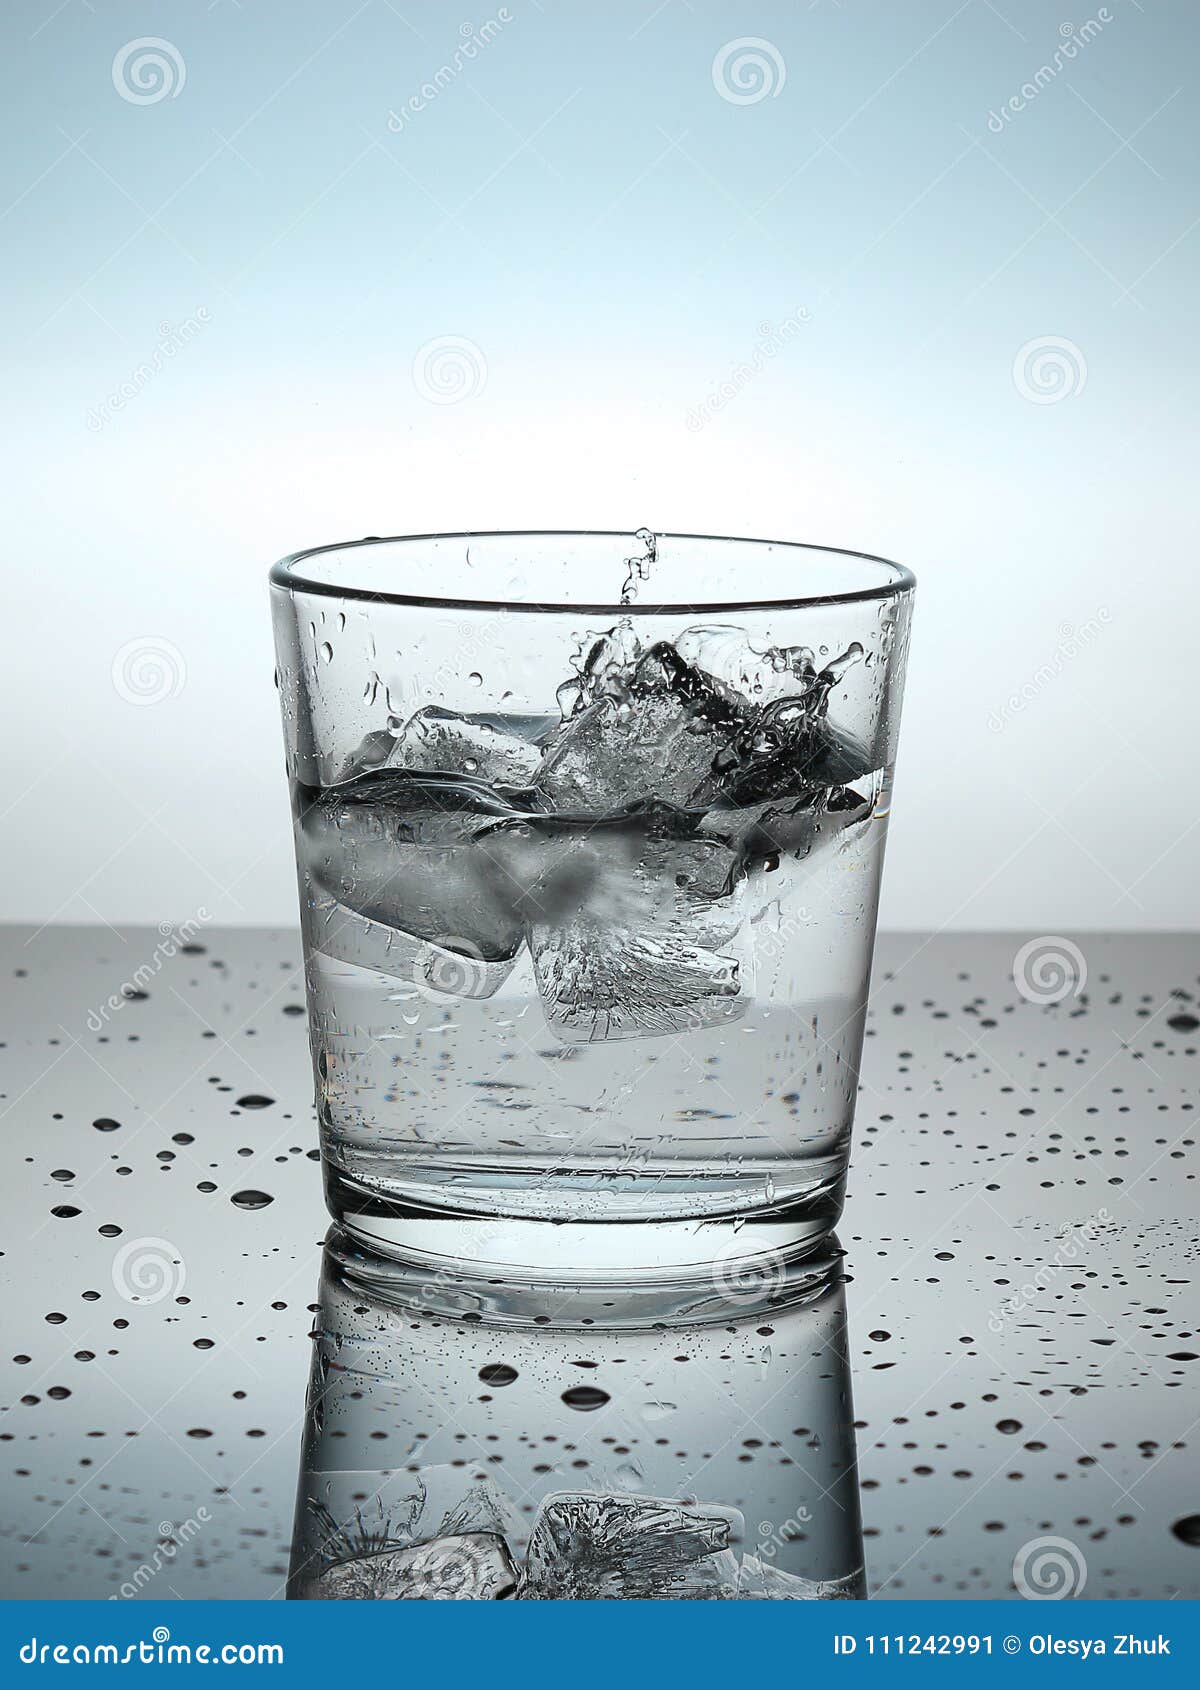 List 105+ Images how cold is a glass of ice water Completed